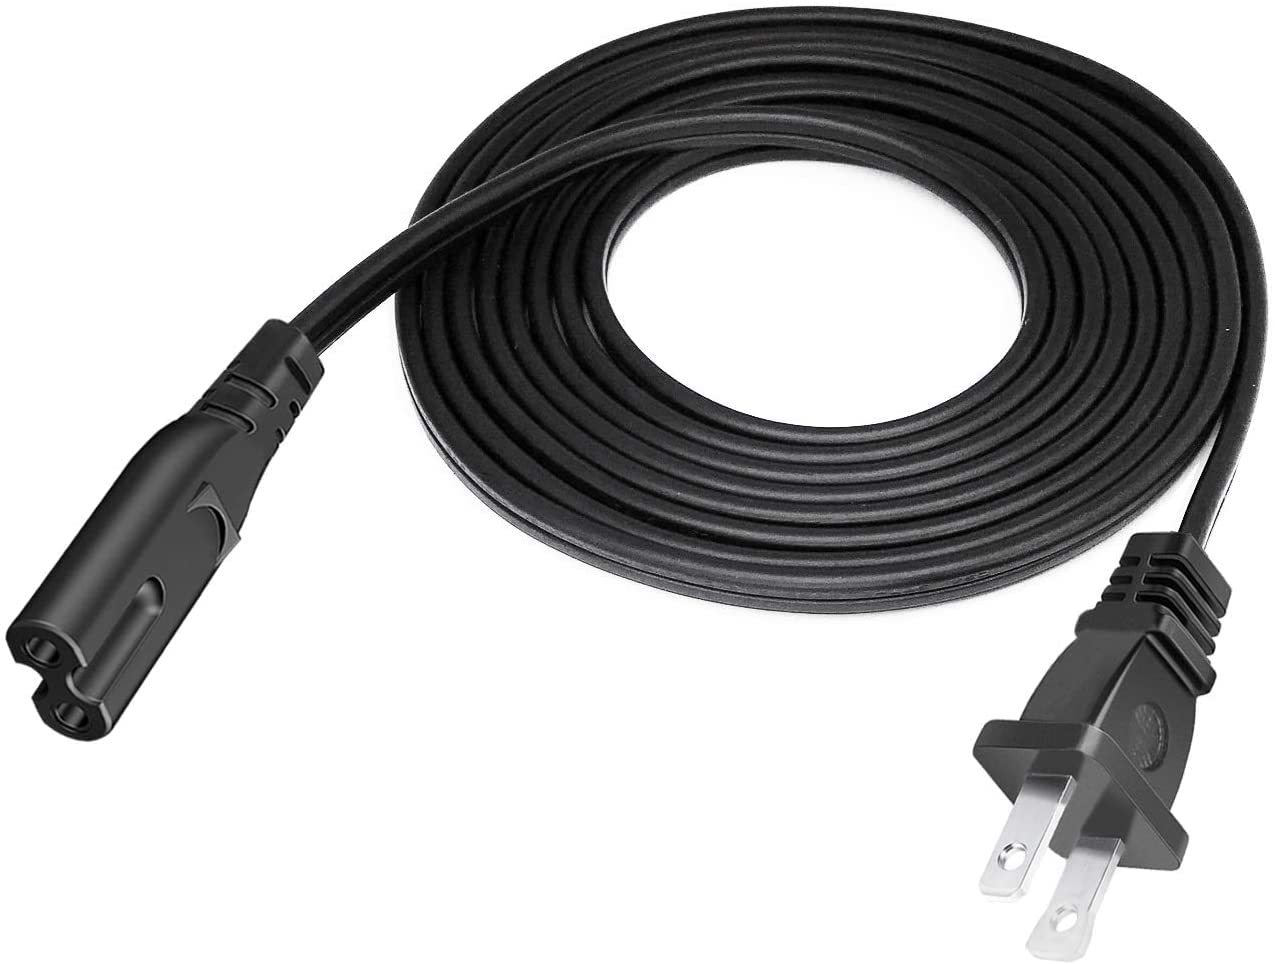 2 Prong Power Cord Compatible with TCL Roku Smart LED LCD TV, TCL TV, Power Supp - $8.89